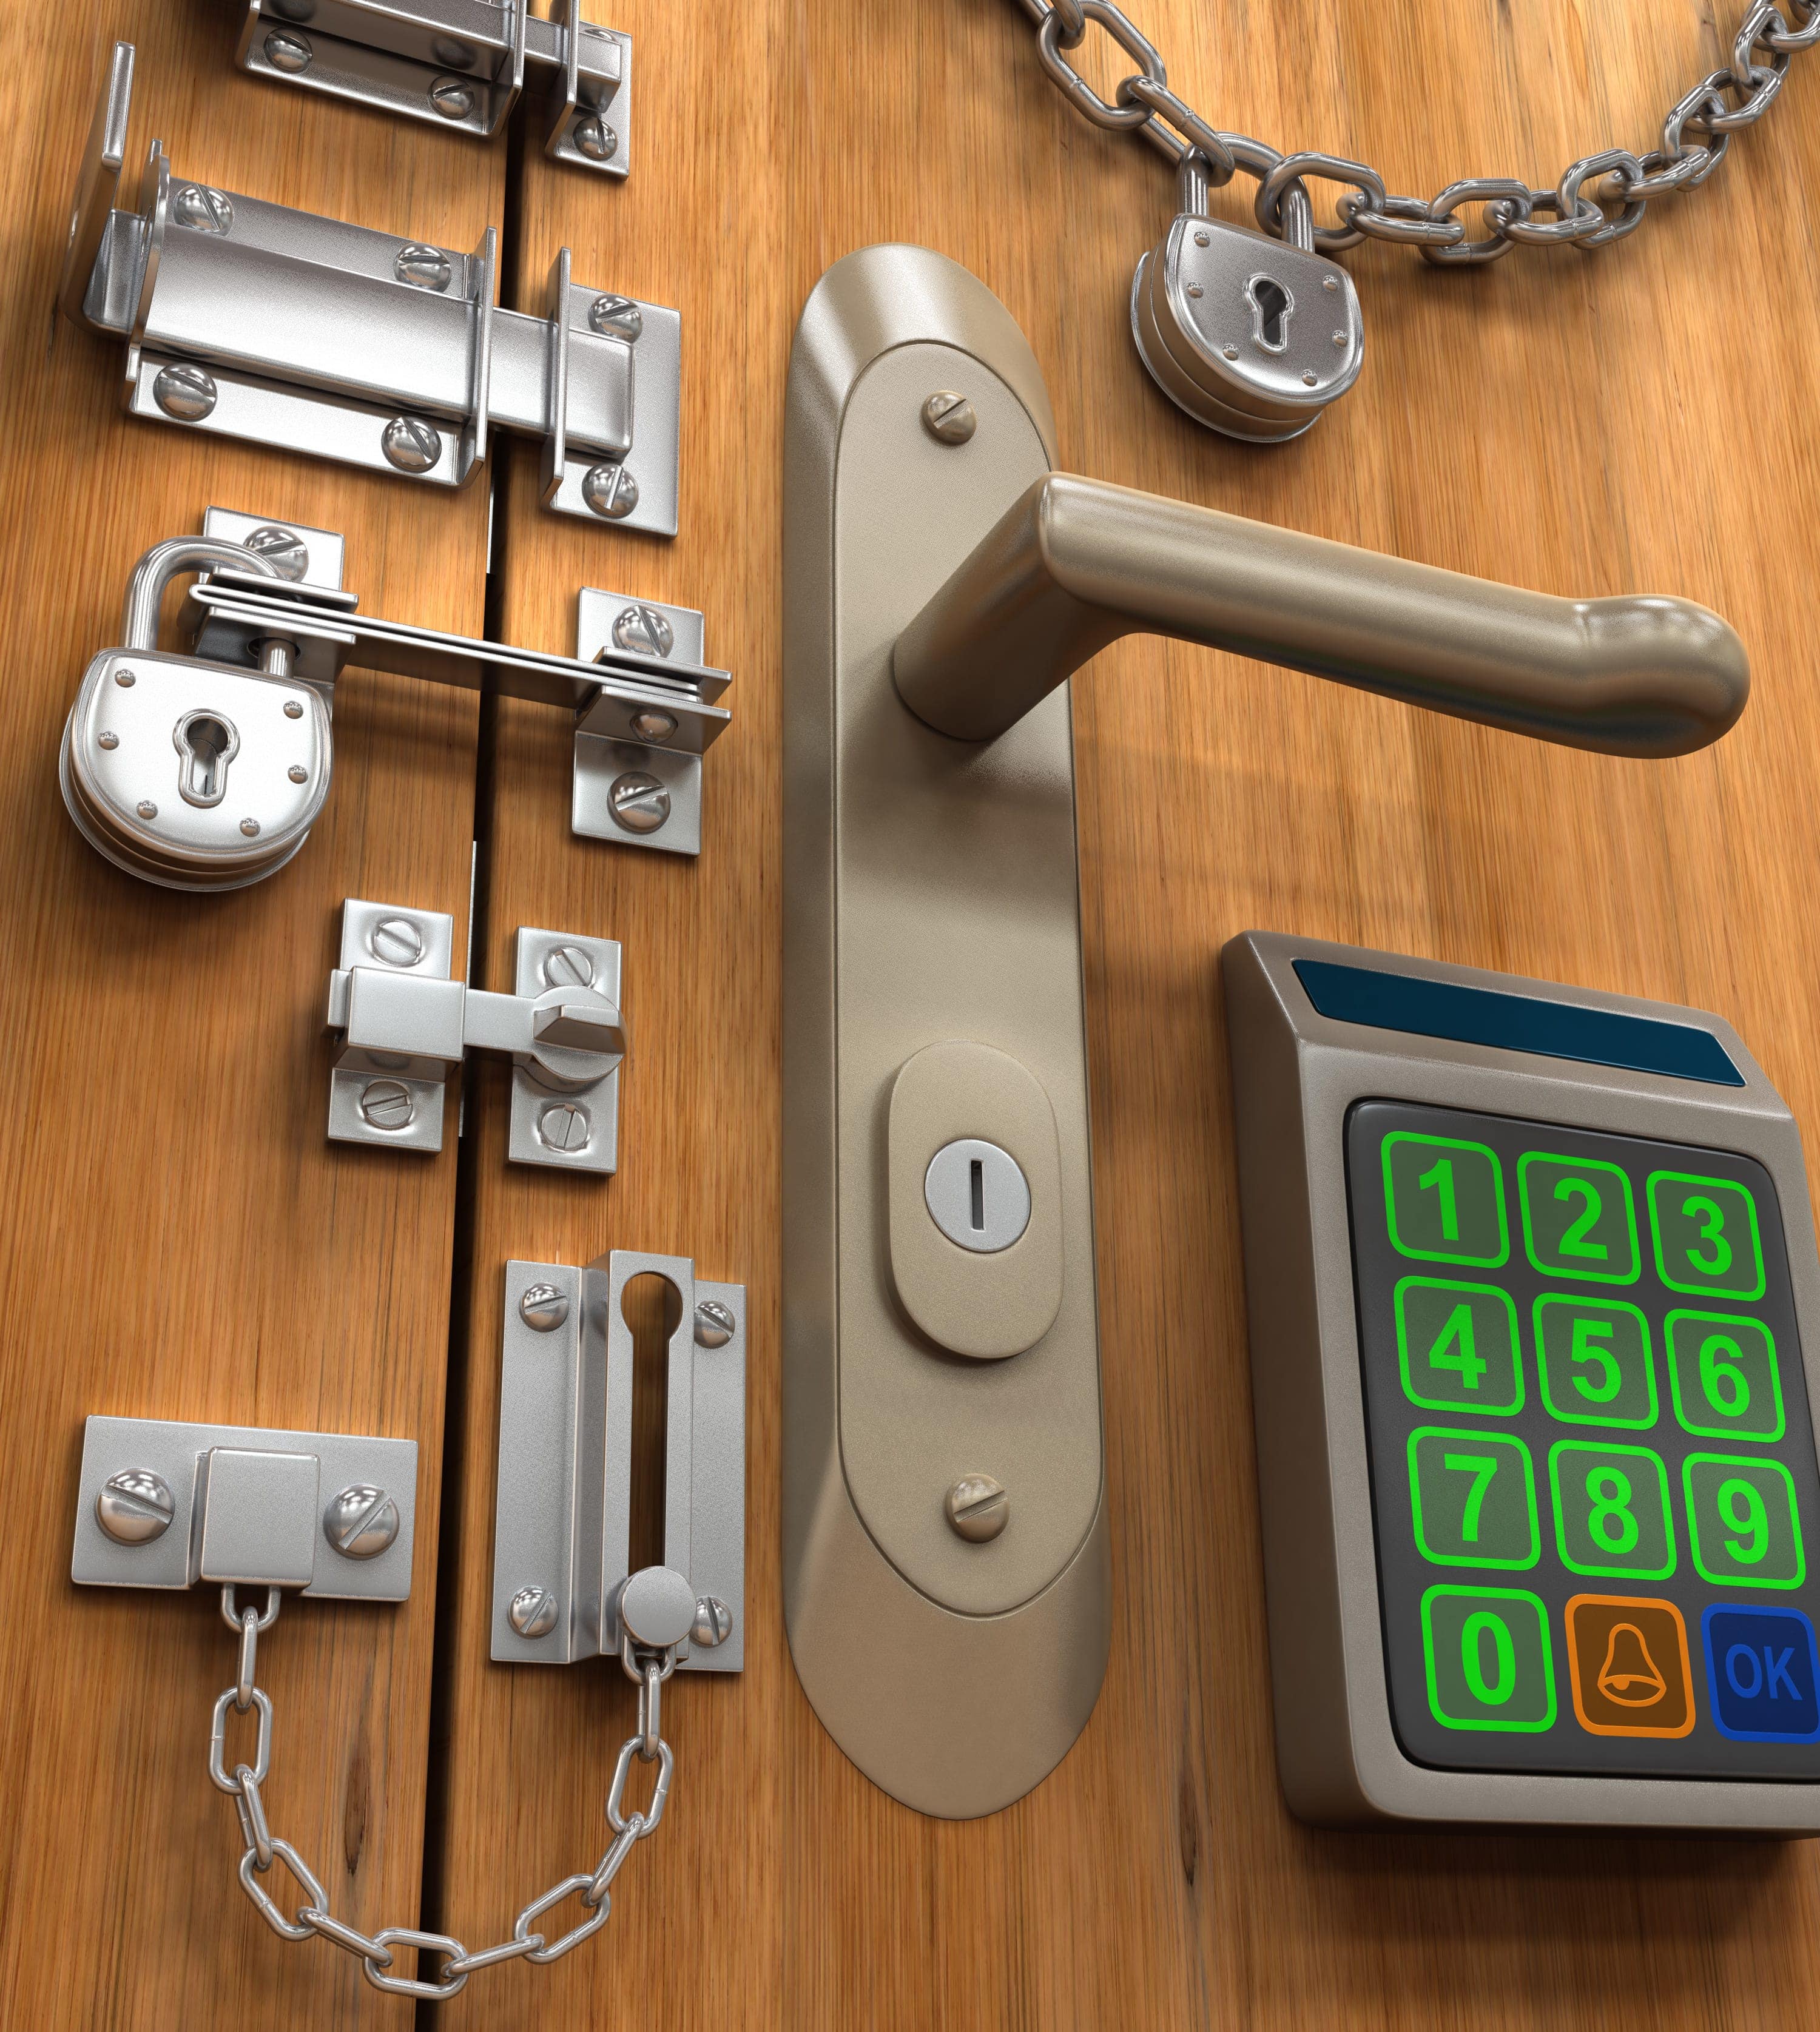 Featured image for “3 Effective Ways to Secure a Home or Business in 2019”